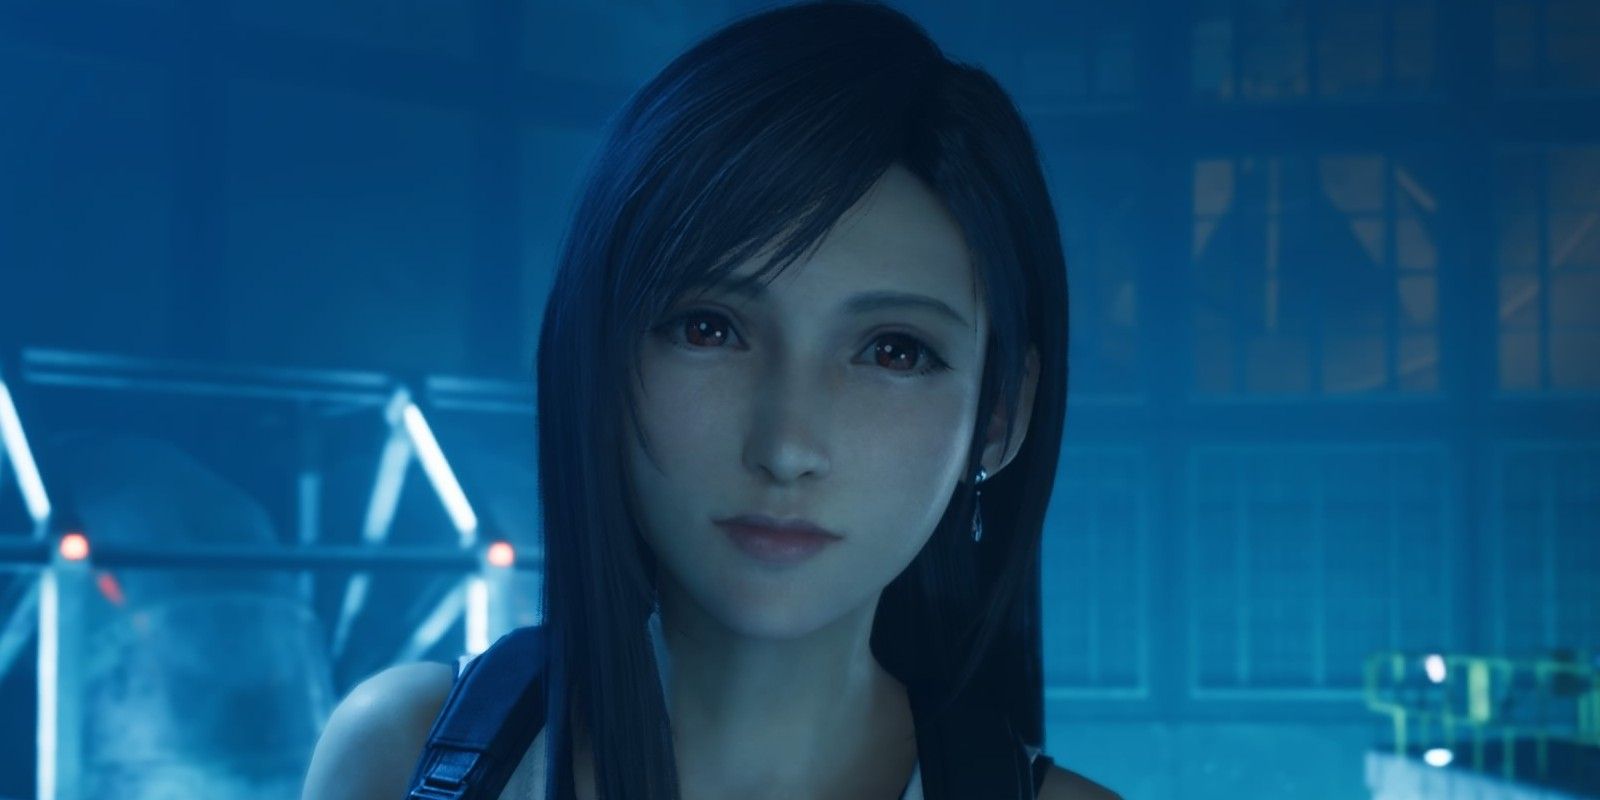 Final Fantasy VII Remake: Why Cloud Shouldn't Be with Tifa OR Aerith